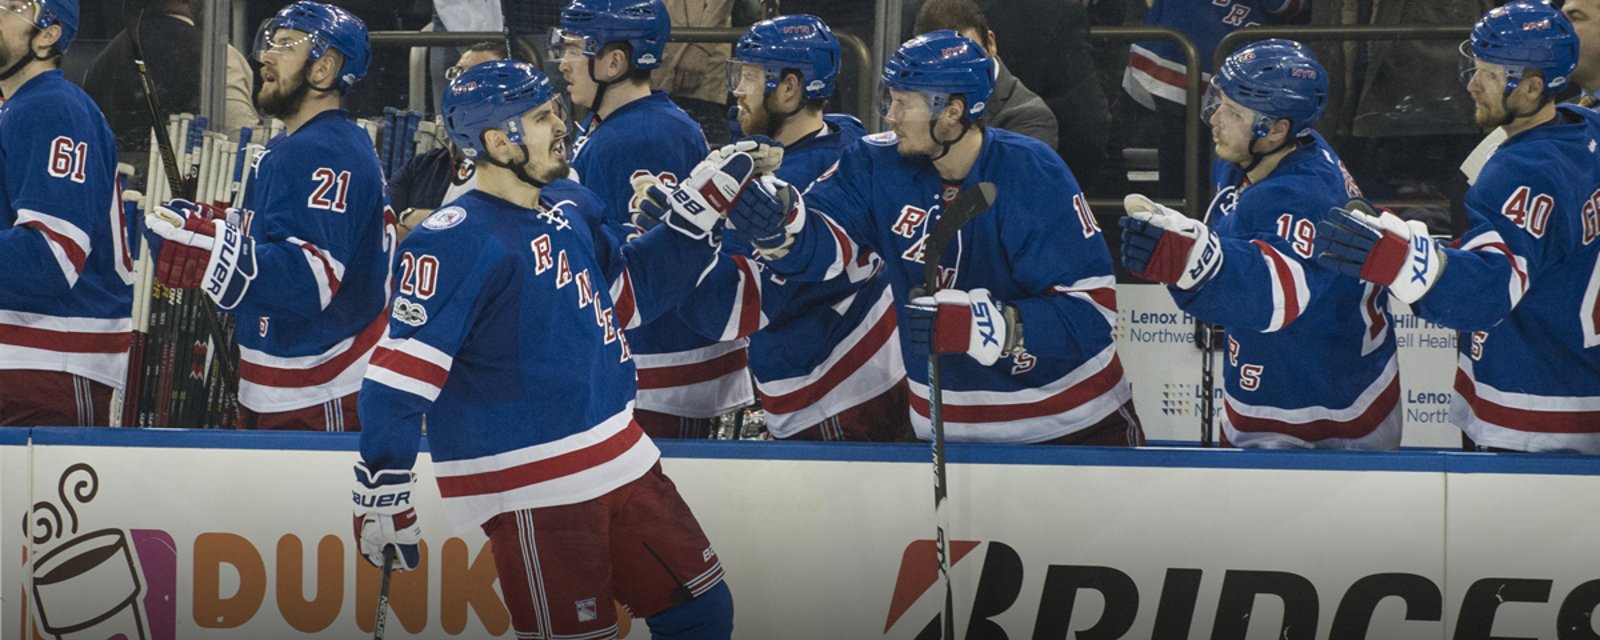 Rumor roundup: Major Rangers' players on the way out?